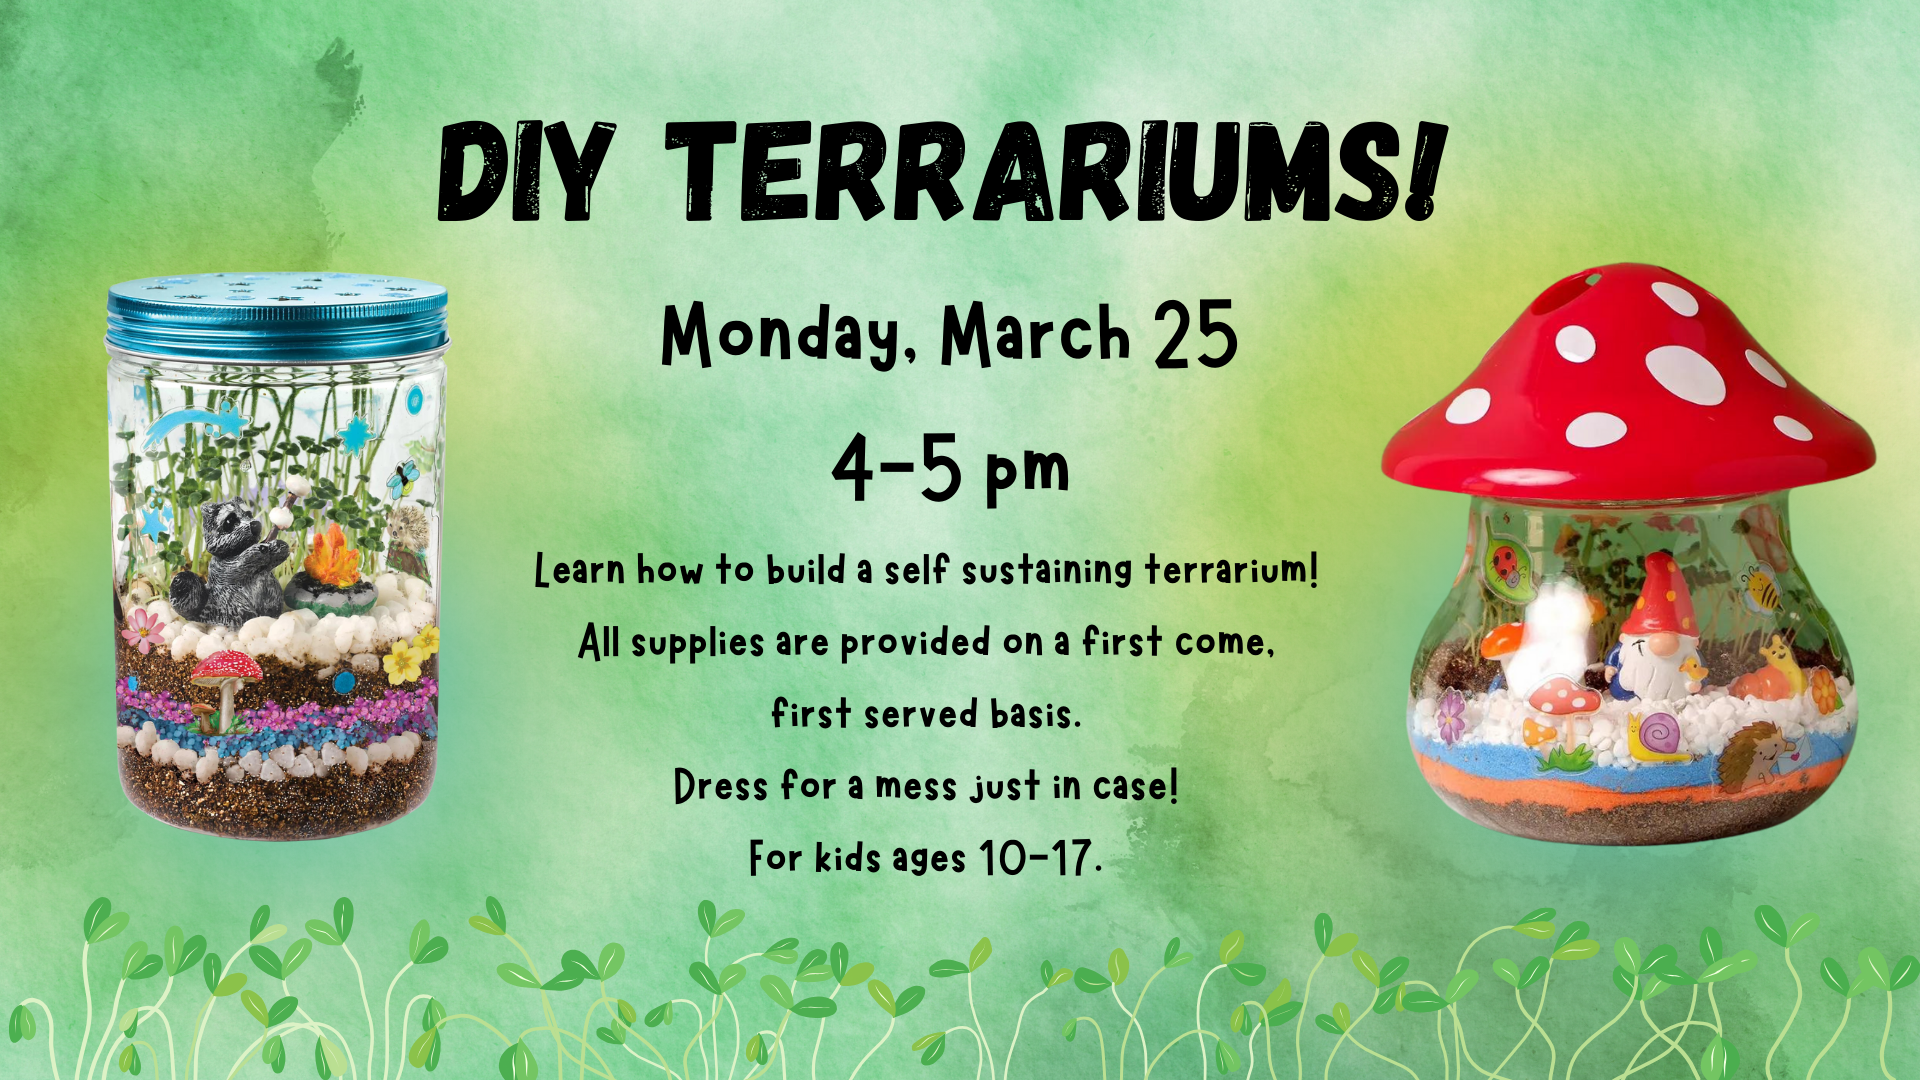 DIY Terrariums, for kids ages 10-17, Monday, March 25 at 4:00 pm